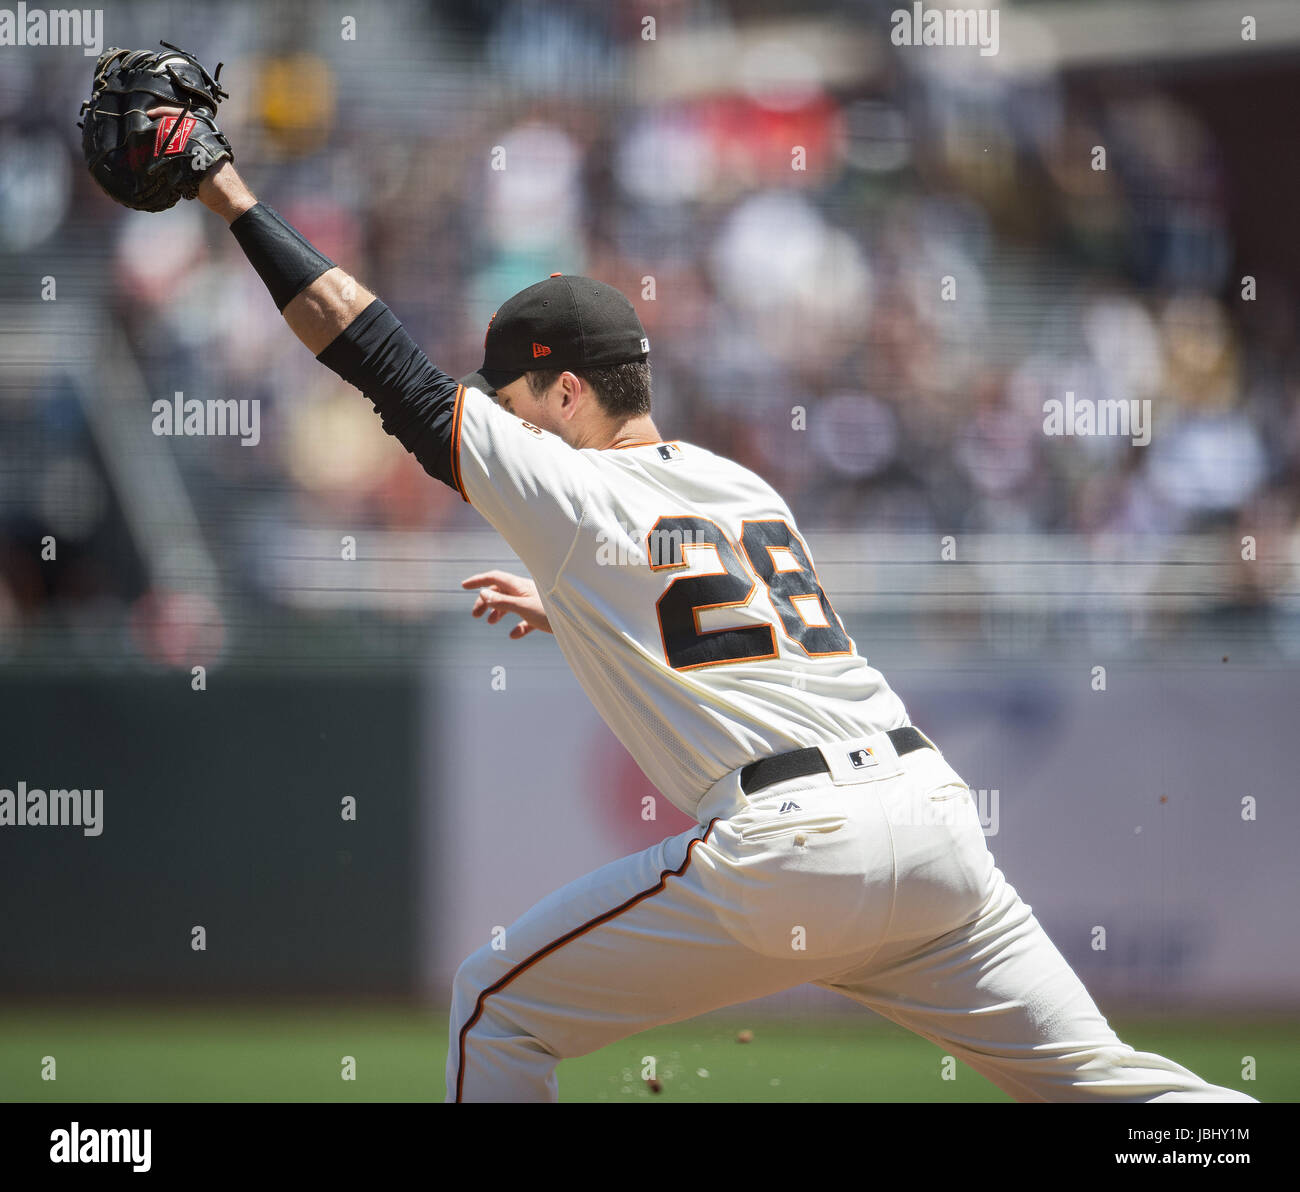 San Francisco, California, USA. 11th June, 2017. San Francisco Giants first baseman Buster Posey (28) makes the catch to beat Minnesota Twins designated hitter Robbie Grossman (36) (not shown) in the first inning during a MLB baseball game between the Minnesota Twins and the San Francisco Giants on ''Dog Days of Summer'' at AT&T Park in San Francisco, California. Valerie Shoaps/CSM/Alamy Live News Stock Photo